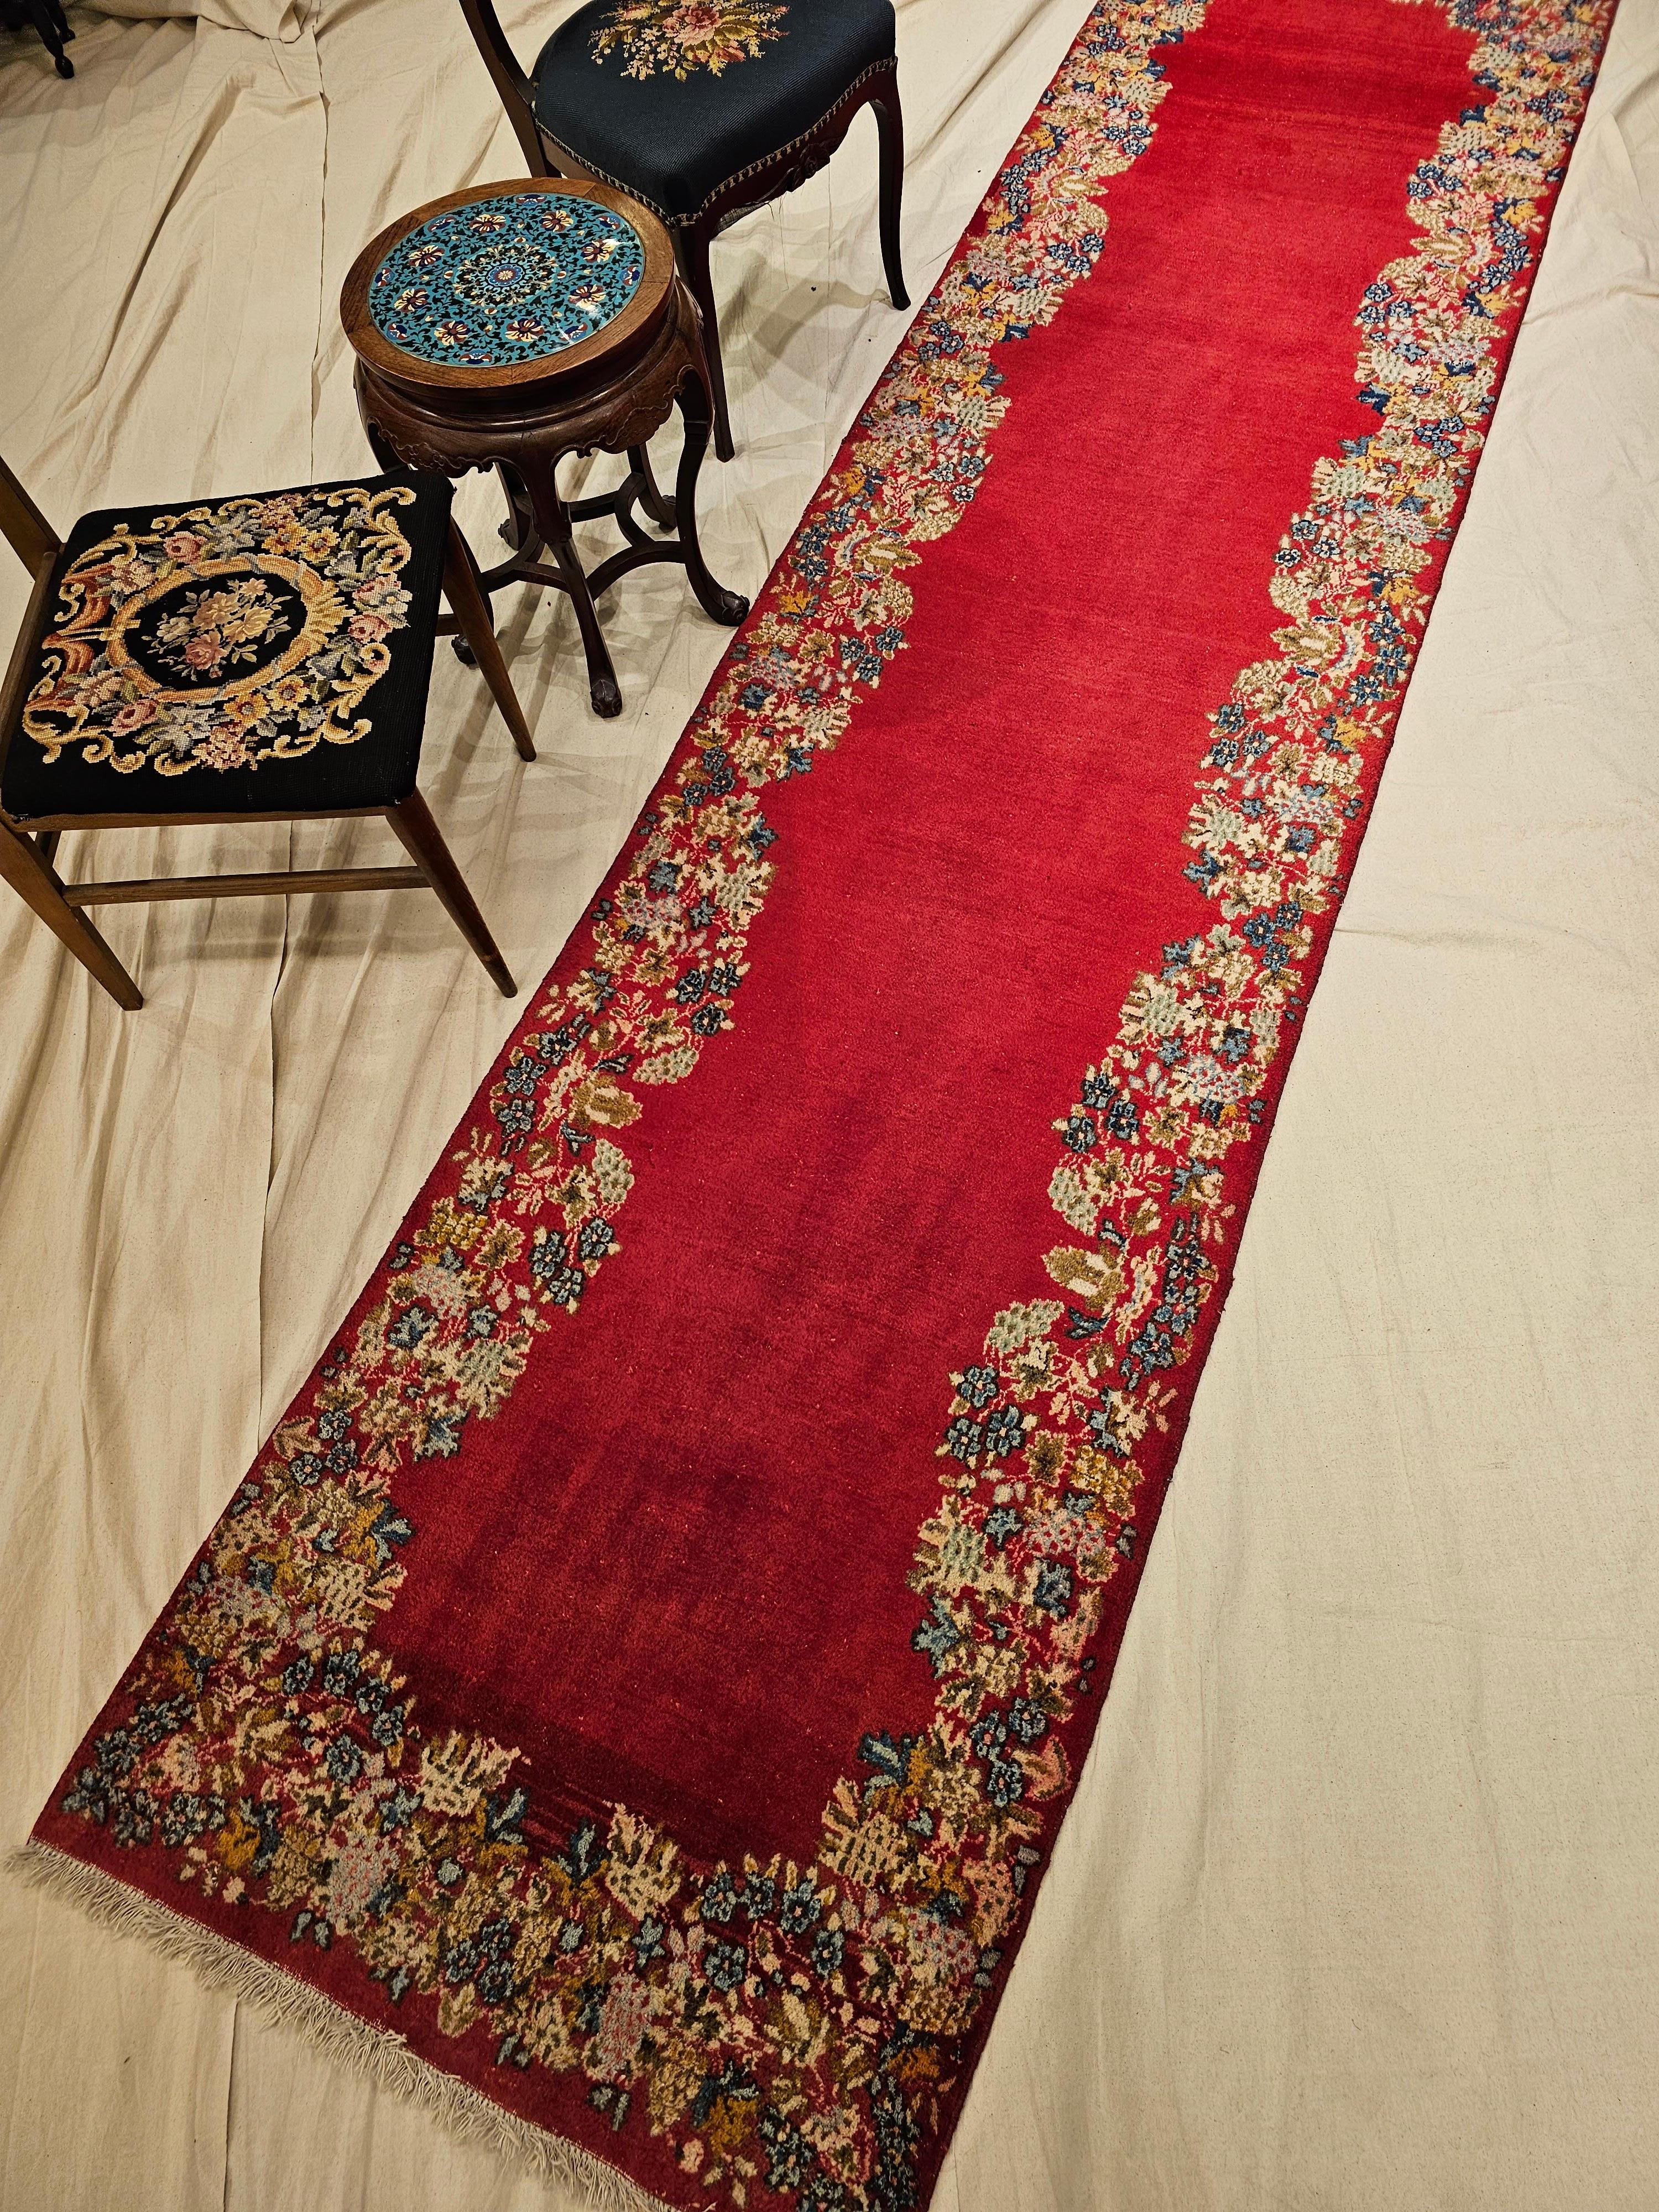 Wool  Vintage Persian Kerman Runner in Floral Design in Red, Yellow, Green, Blue For Sale